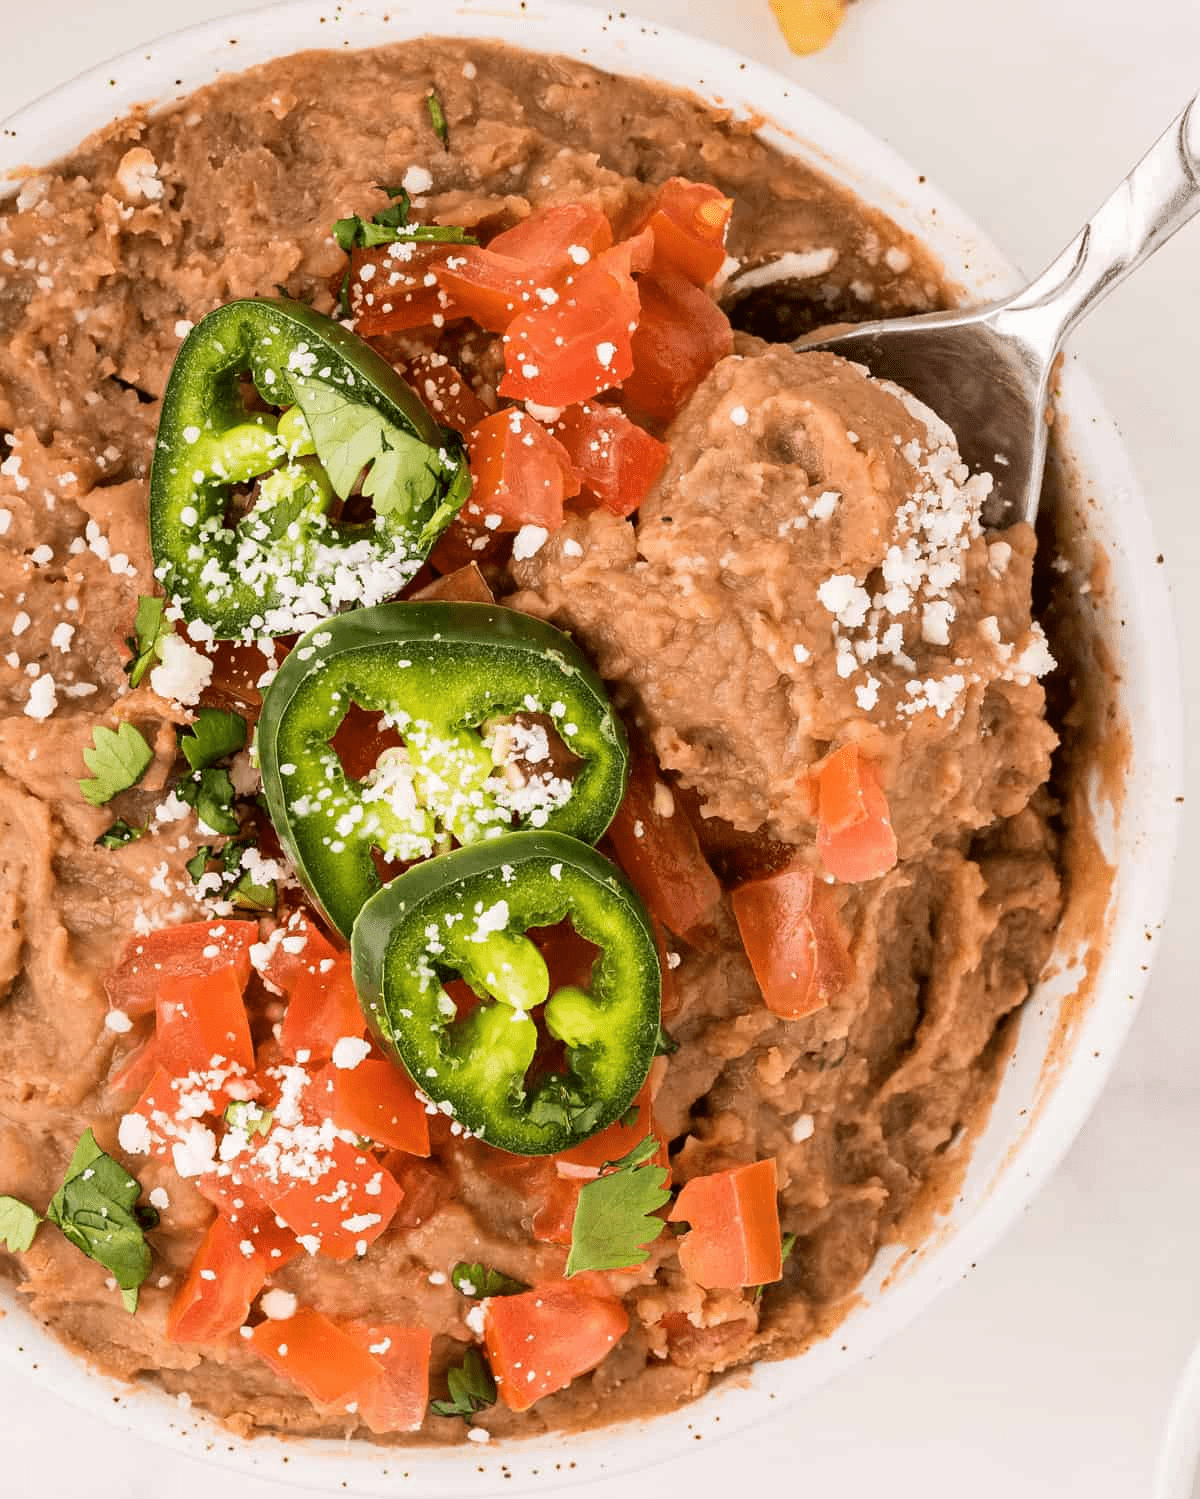 Refried beans in a bowl with pepper and jalapenos on top and a spoon inside the bowl.